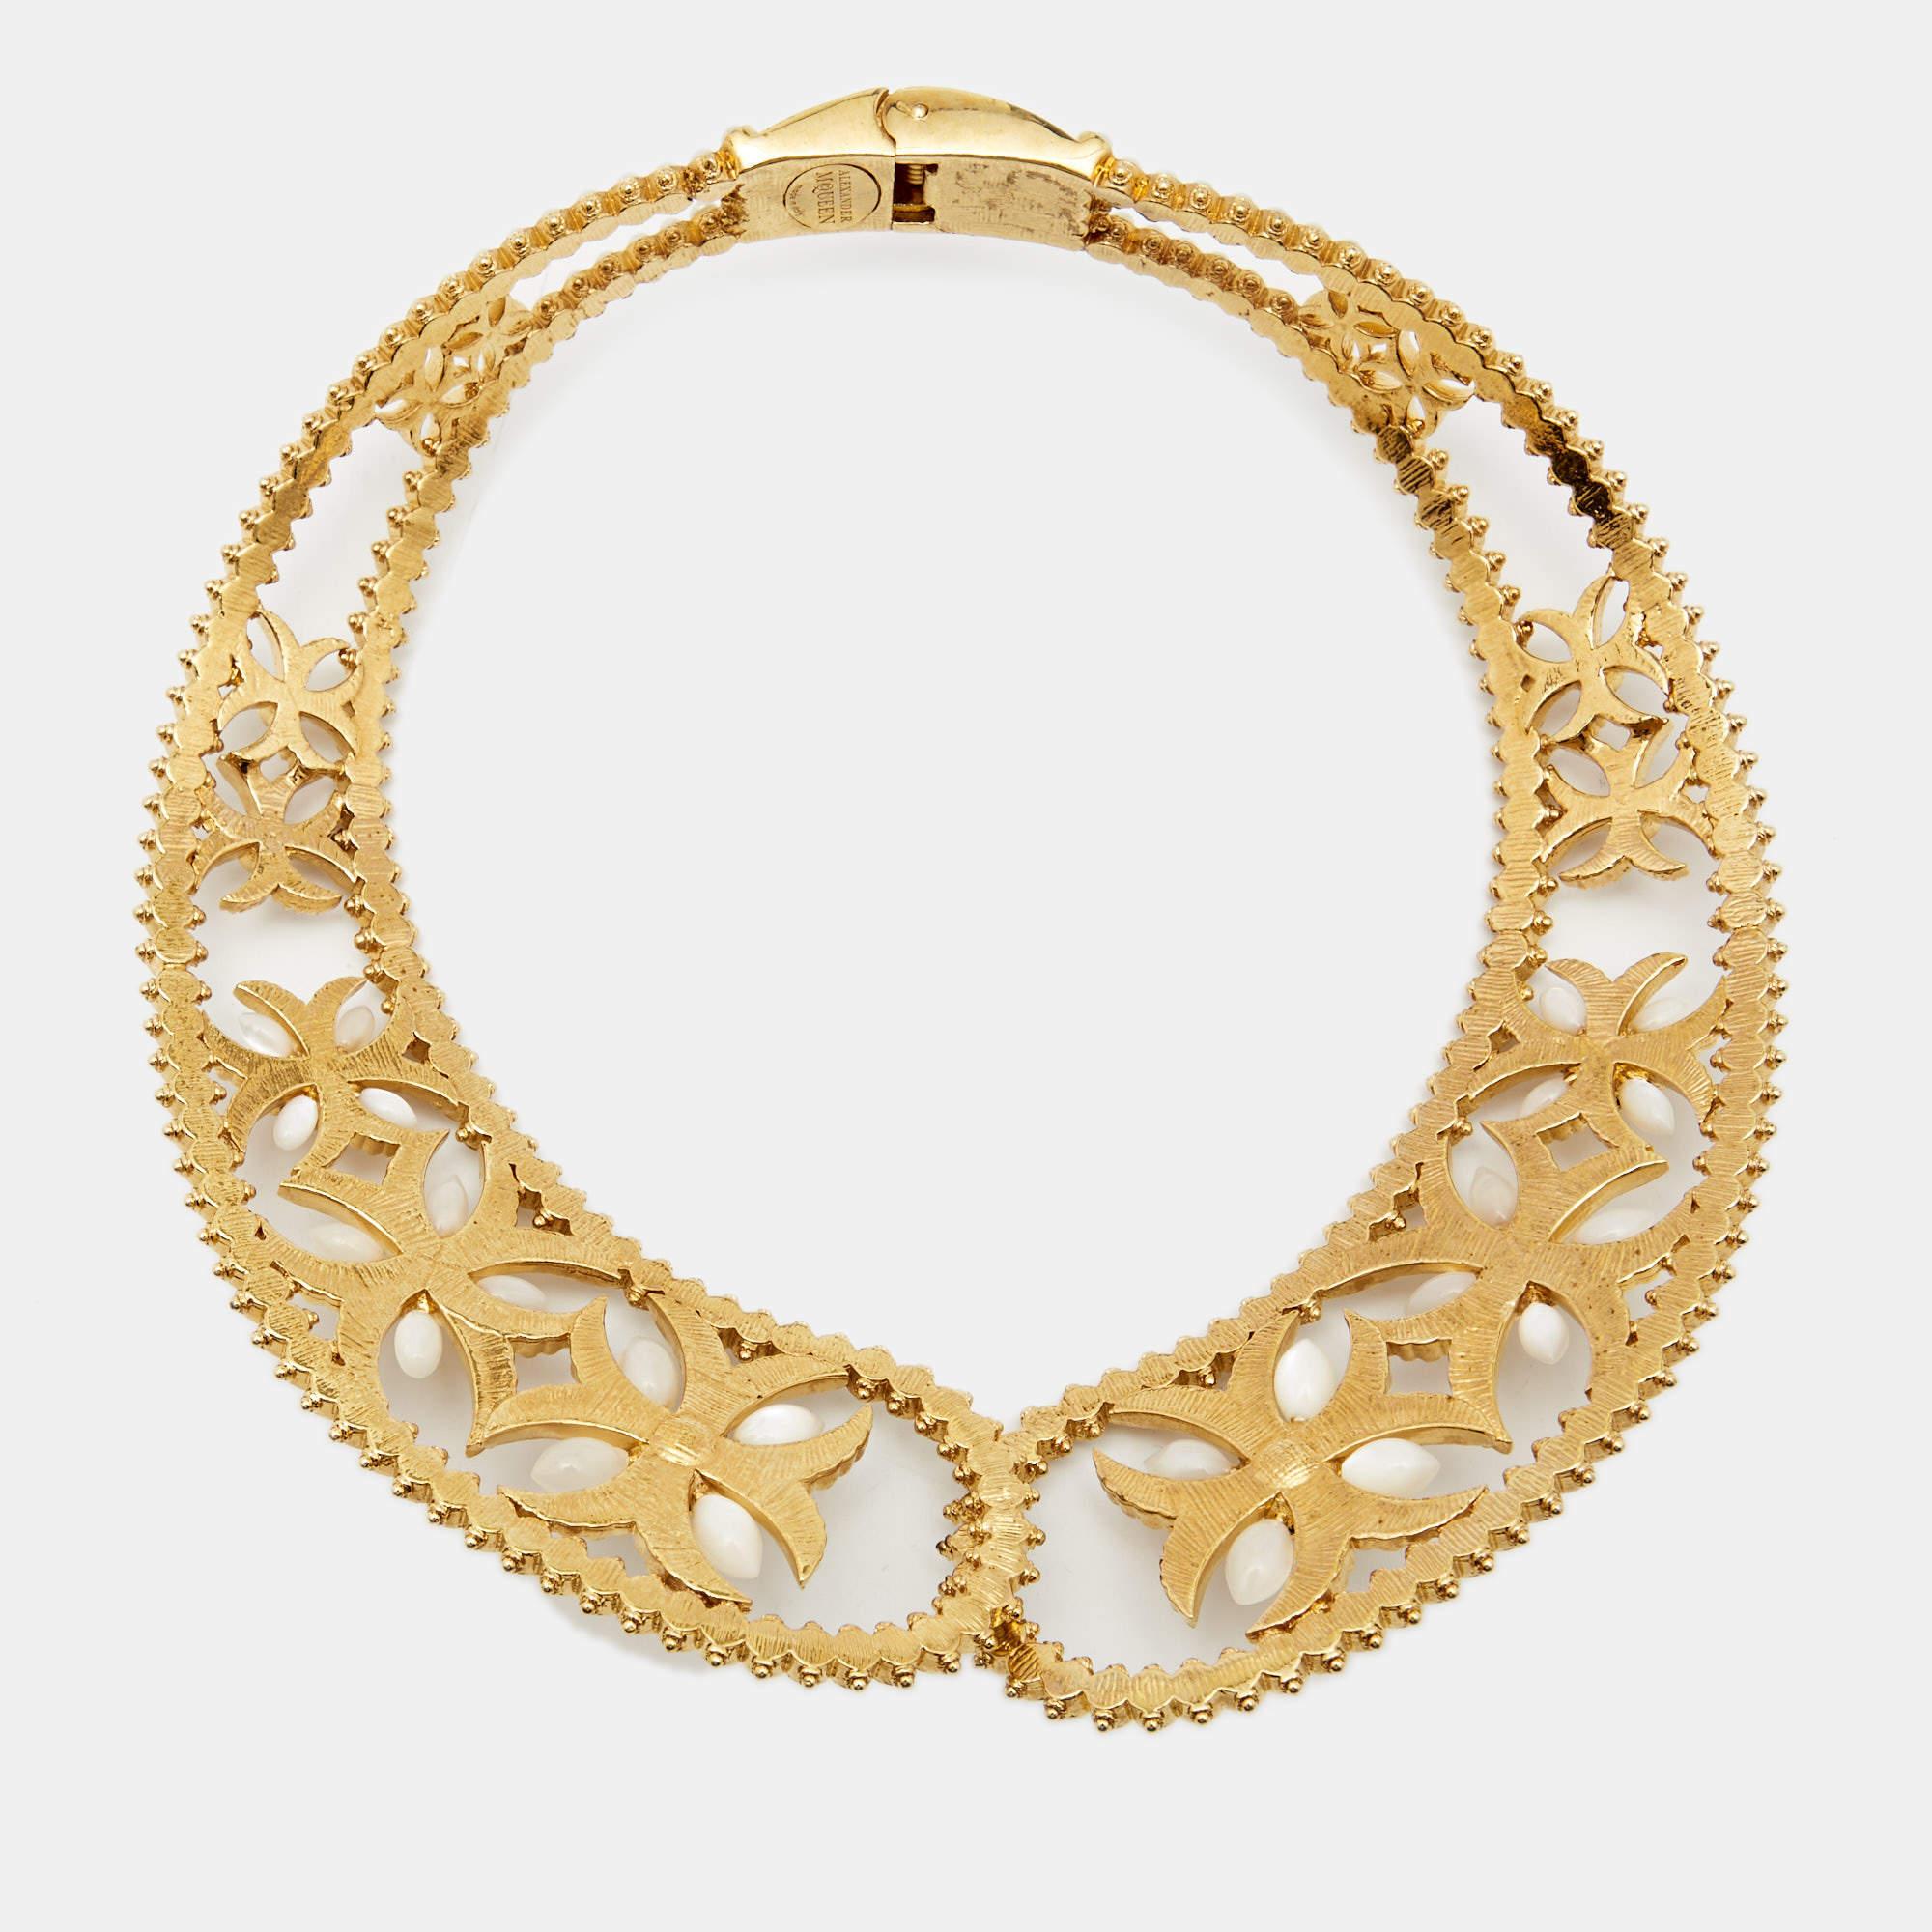 This necklace from Alexander McQueen imparts elegance through its distinctive design. It speaks of impeccable style and ultimate luxury. Flaunt your discerning fashion taste by buying this beauty today!

Includes: Original Box, Original Dust Cloth

